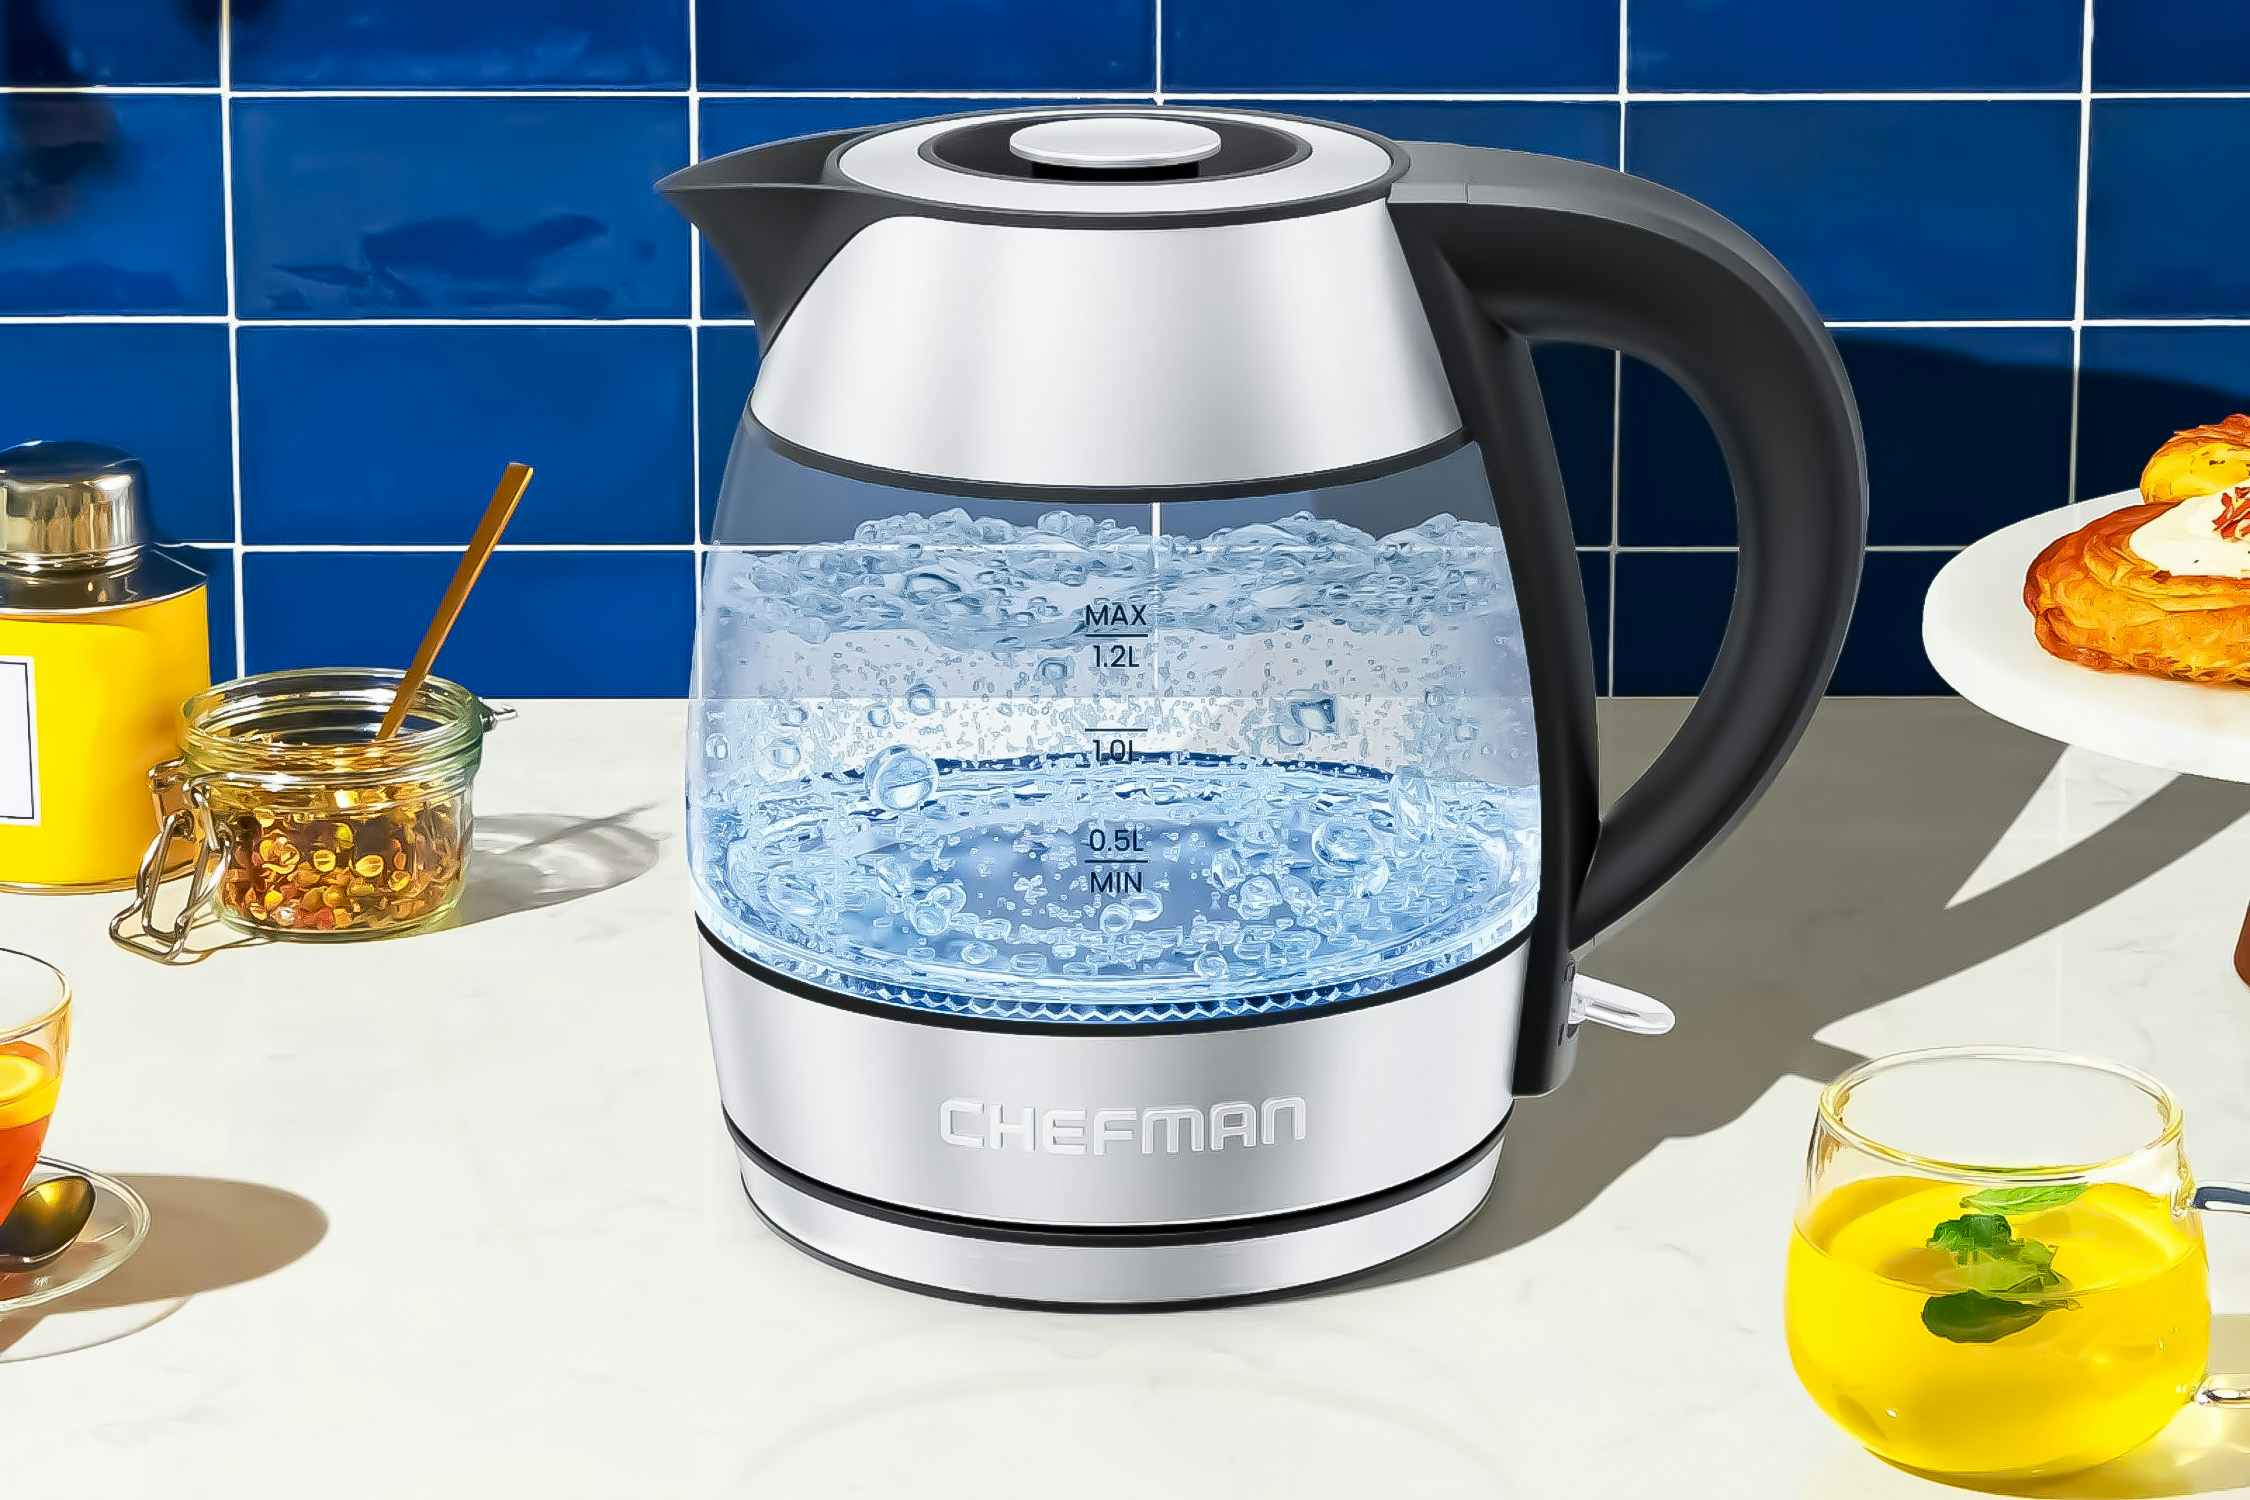 Chefman Electric Kettle, Just $9.48 at Walmart (Reg. $25) — Will Sell Out